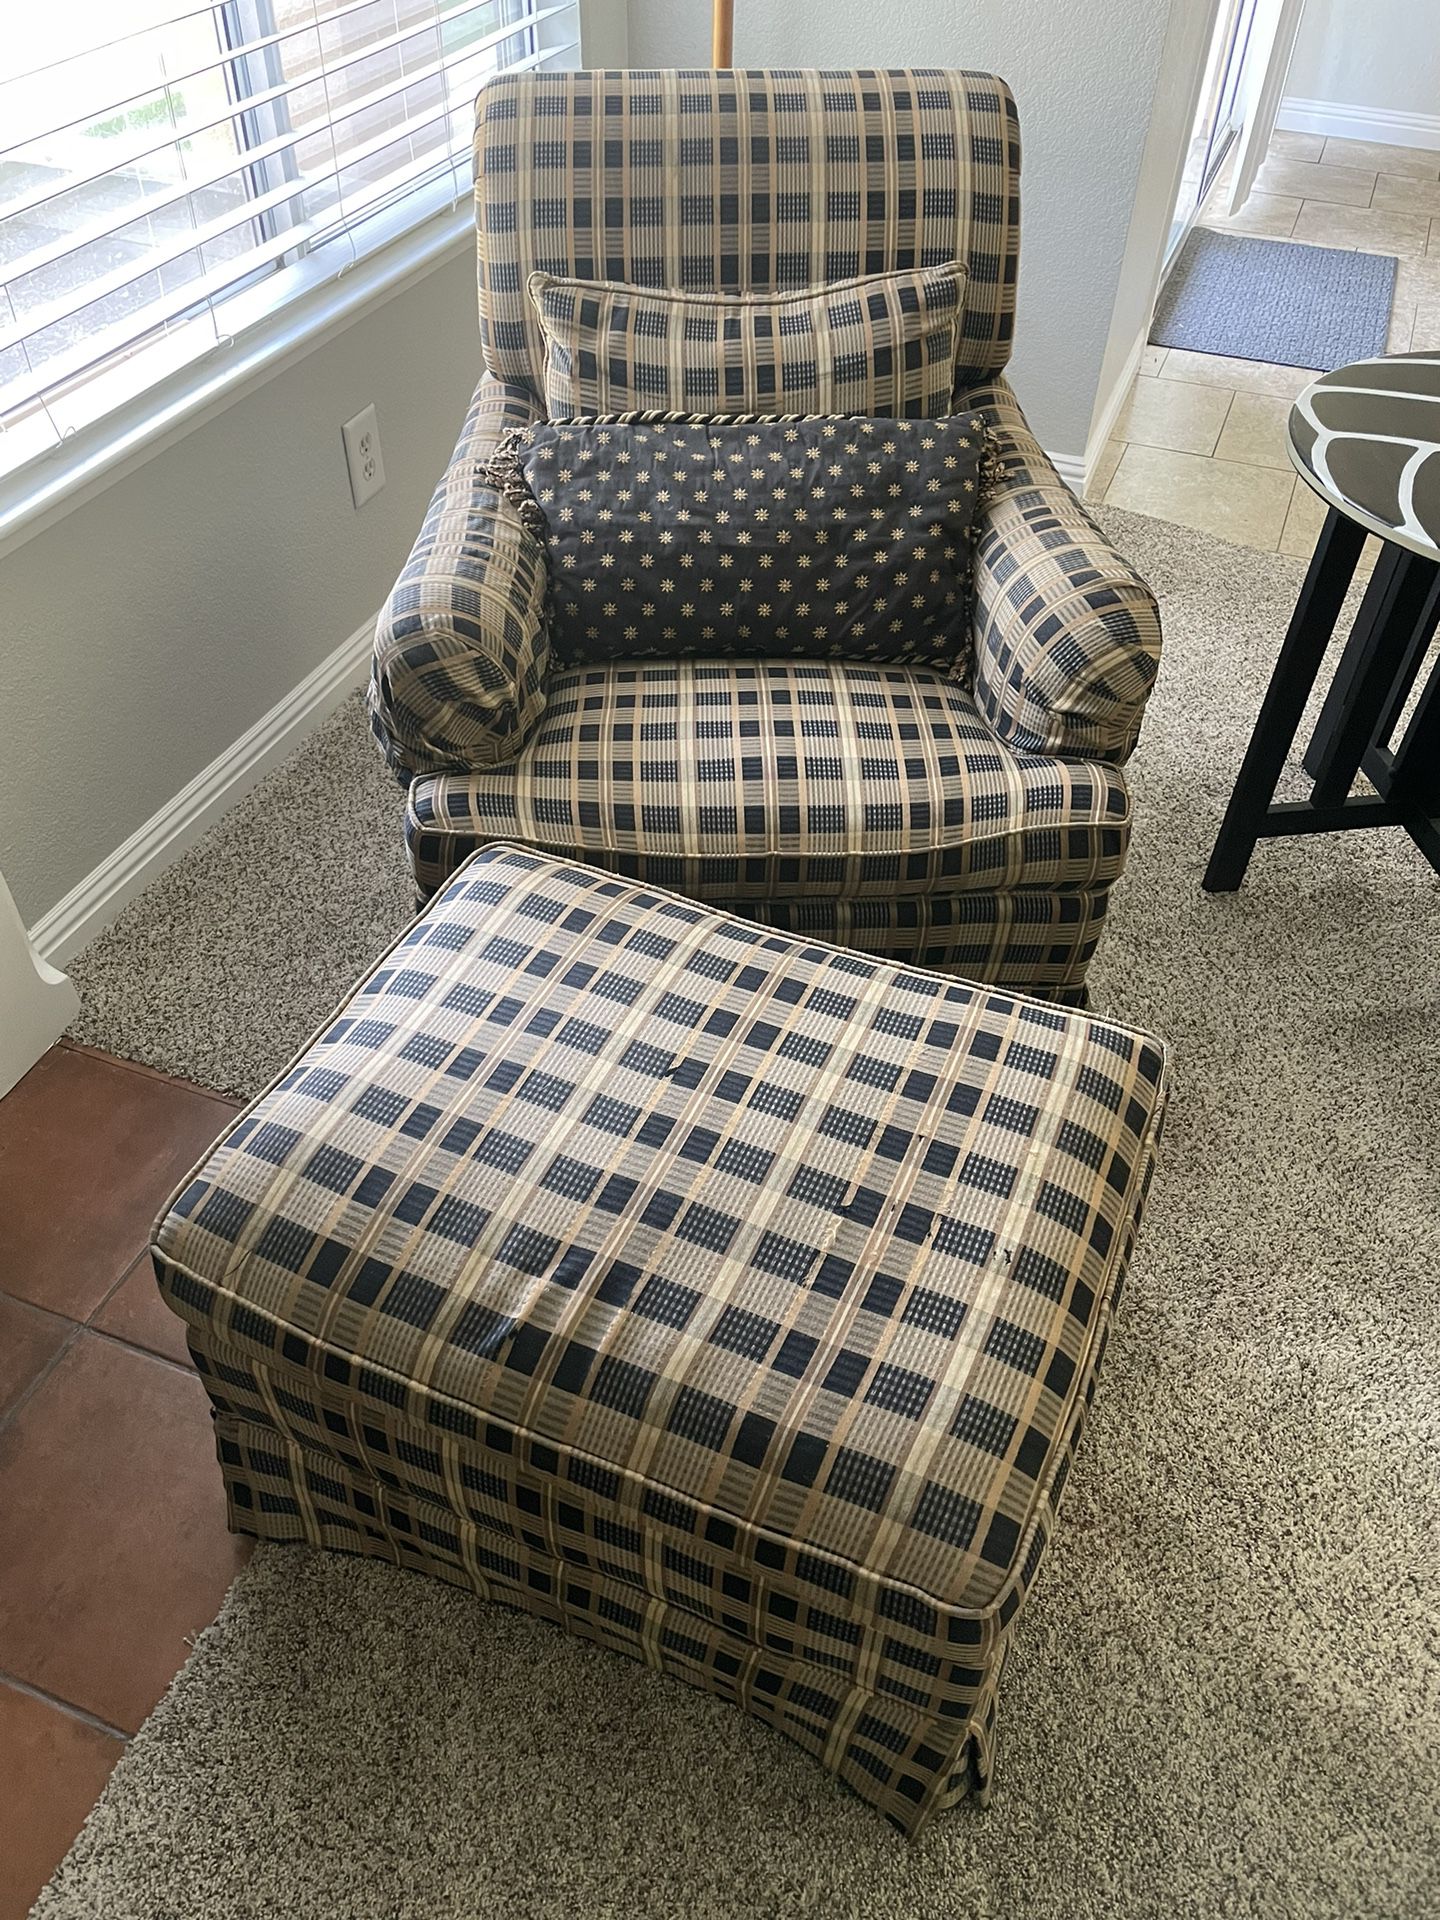 (2) Upholstered Chairs and Ottoman